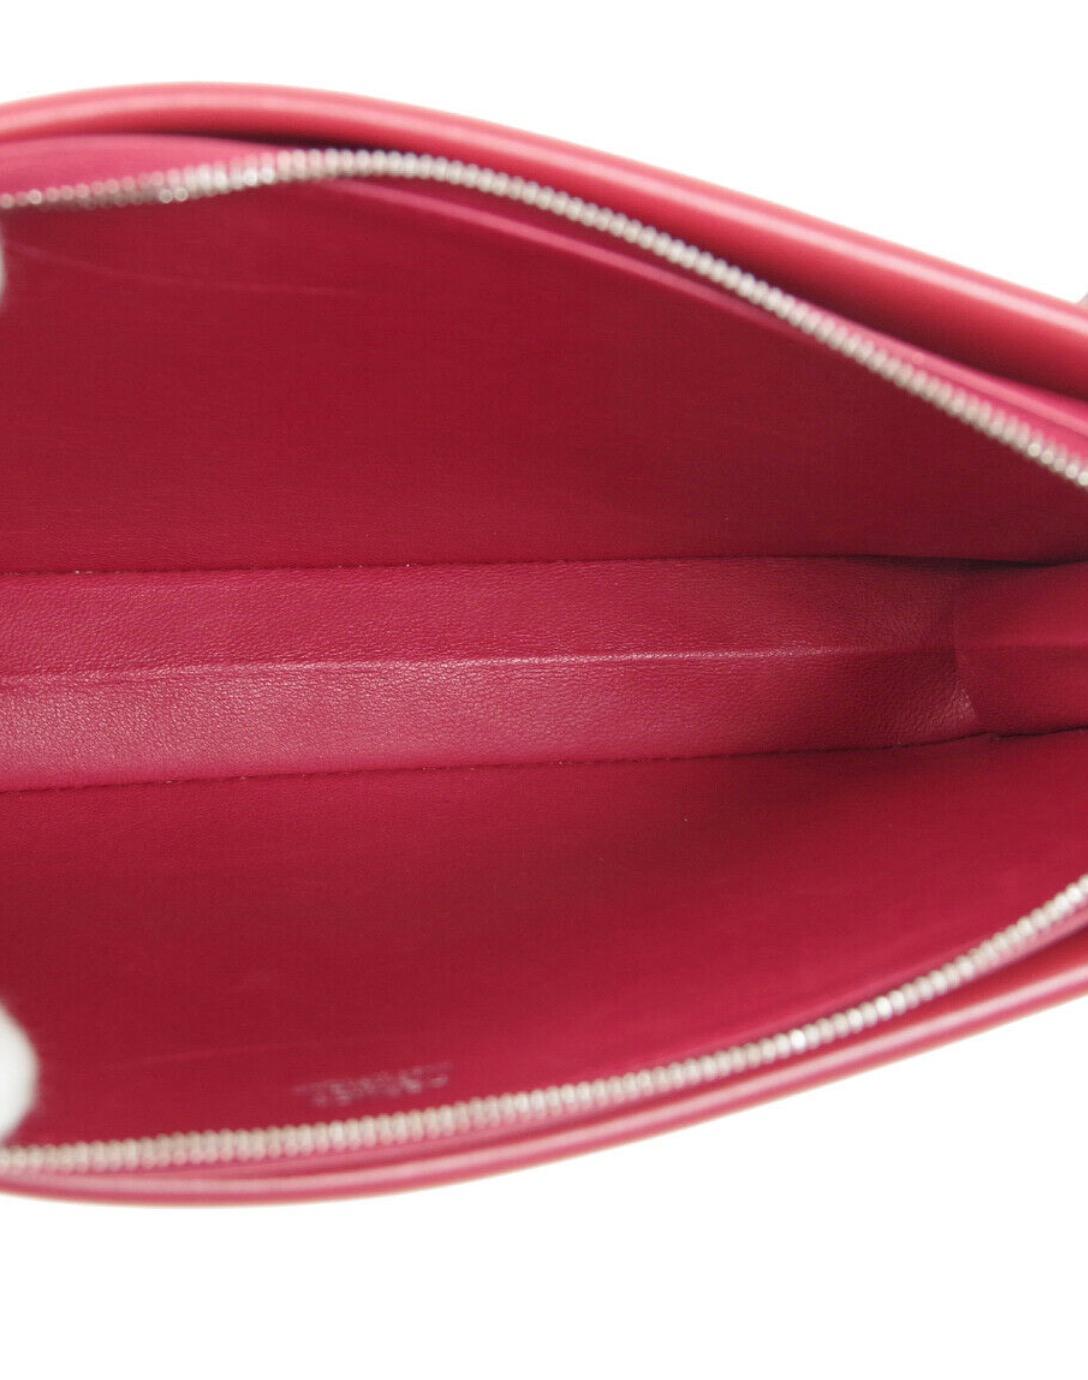 Hermes Red Leather Silver Carrryall Shoulder Top Handle Satchel Small Bag 1